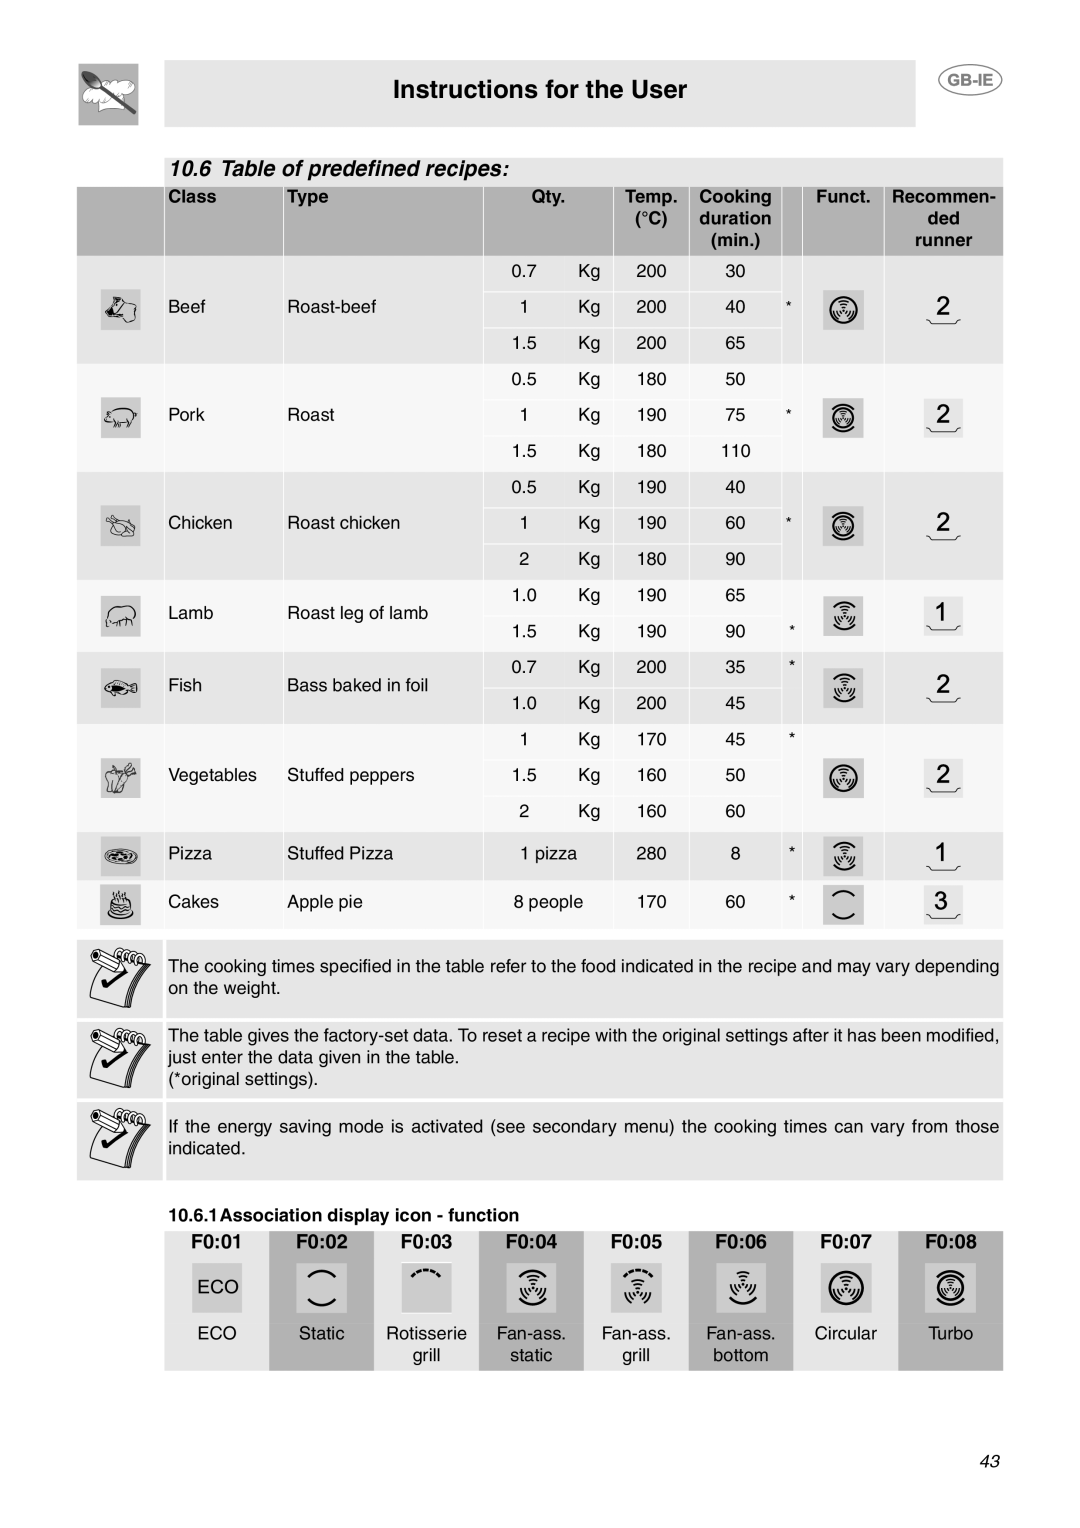 Smeg CE92CMX manual Table of predefined recipes, Instructions for the User, F0, Class, Type, Cooking, duration 